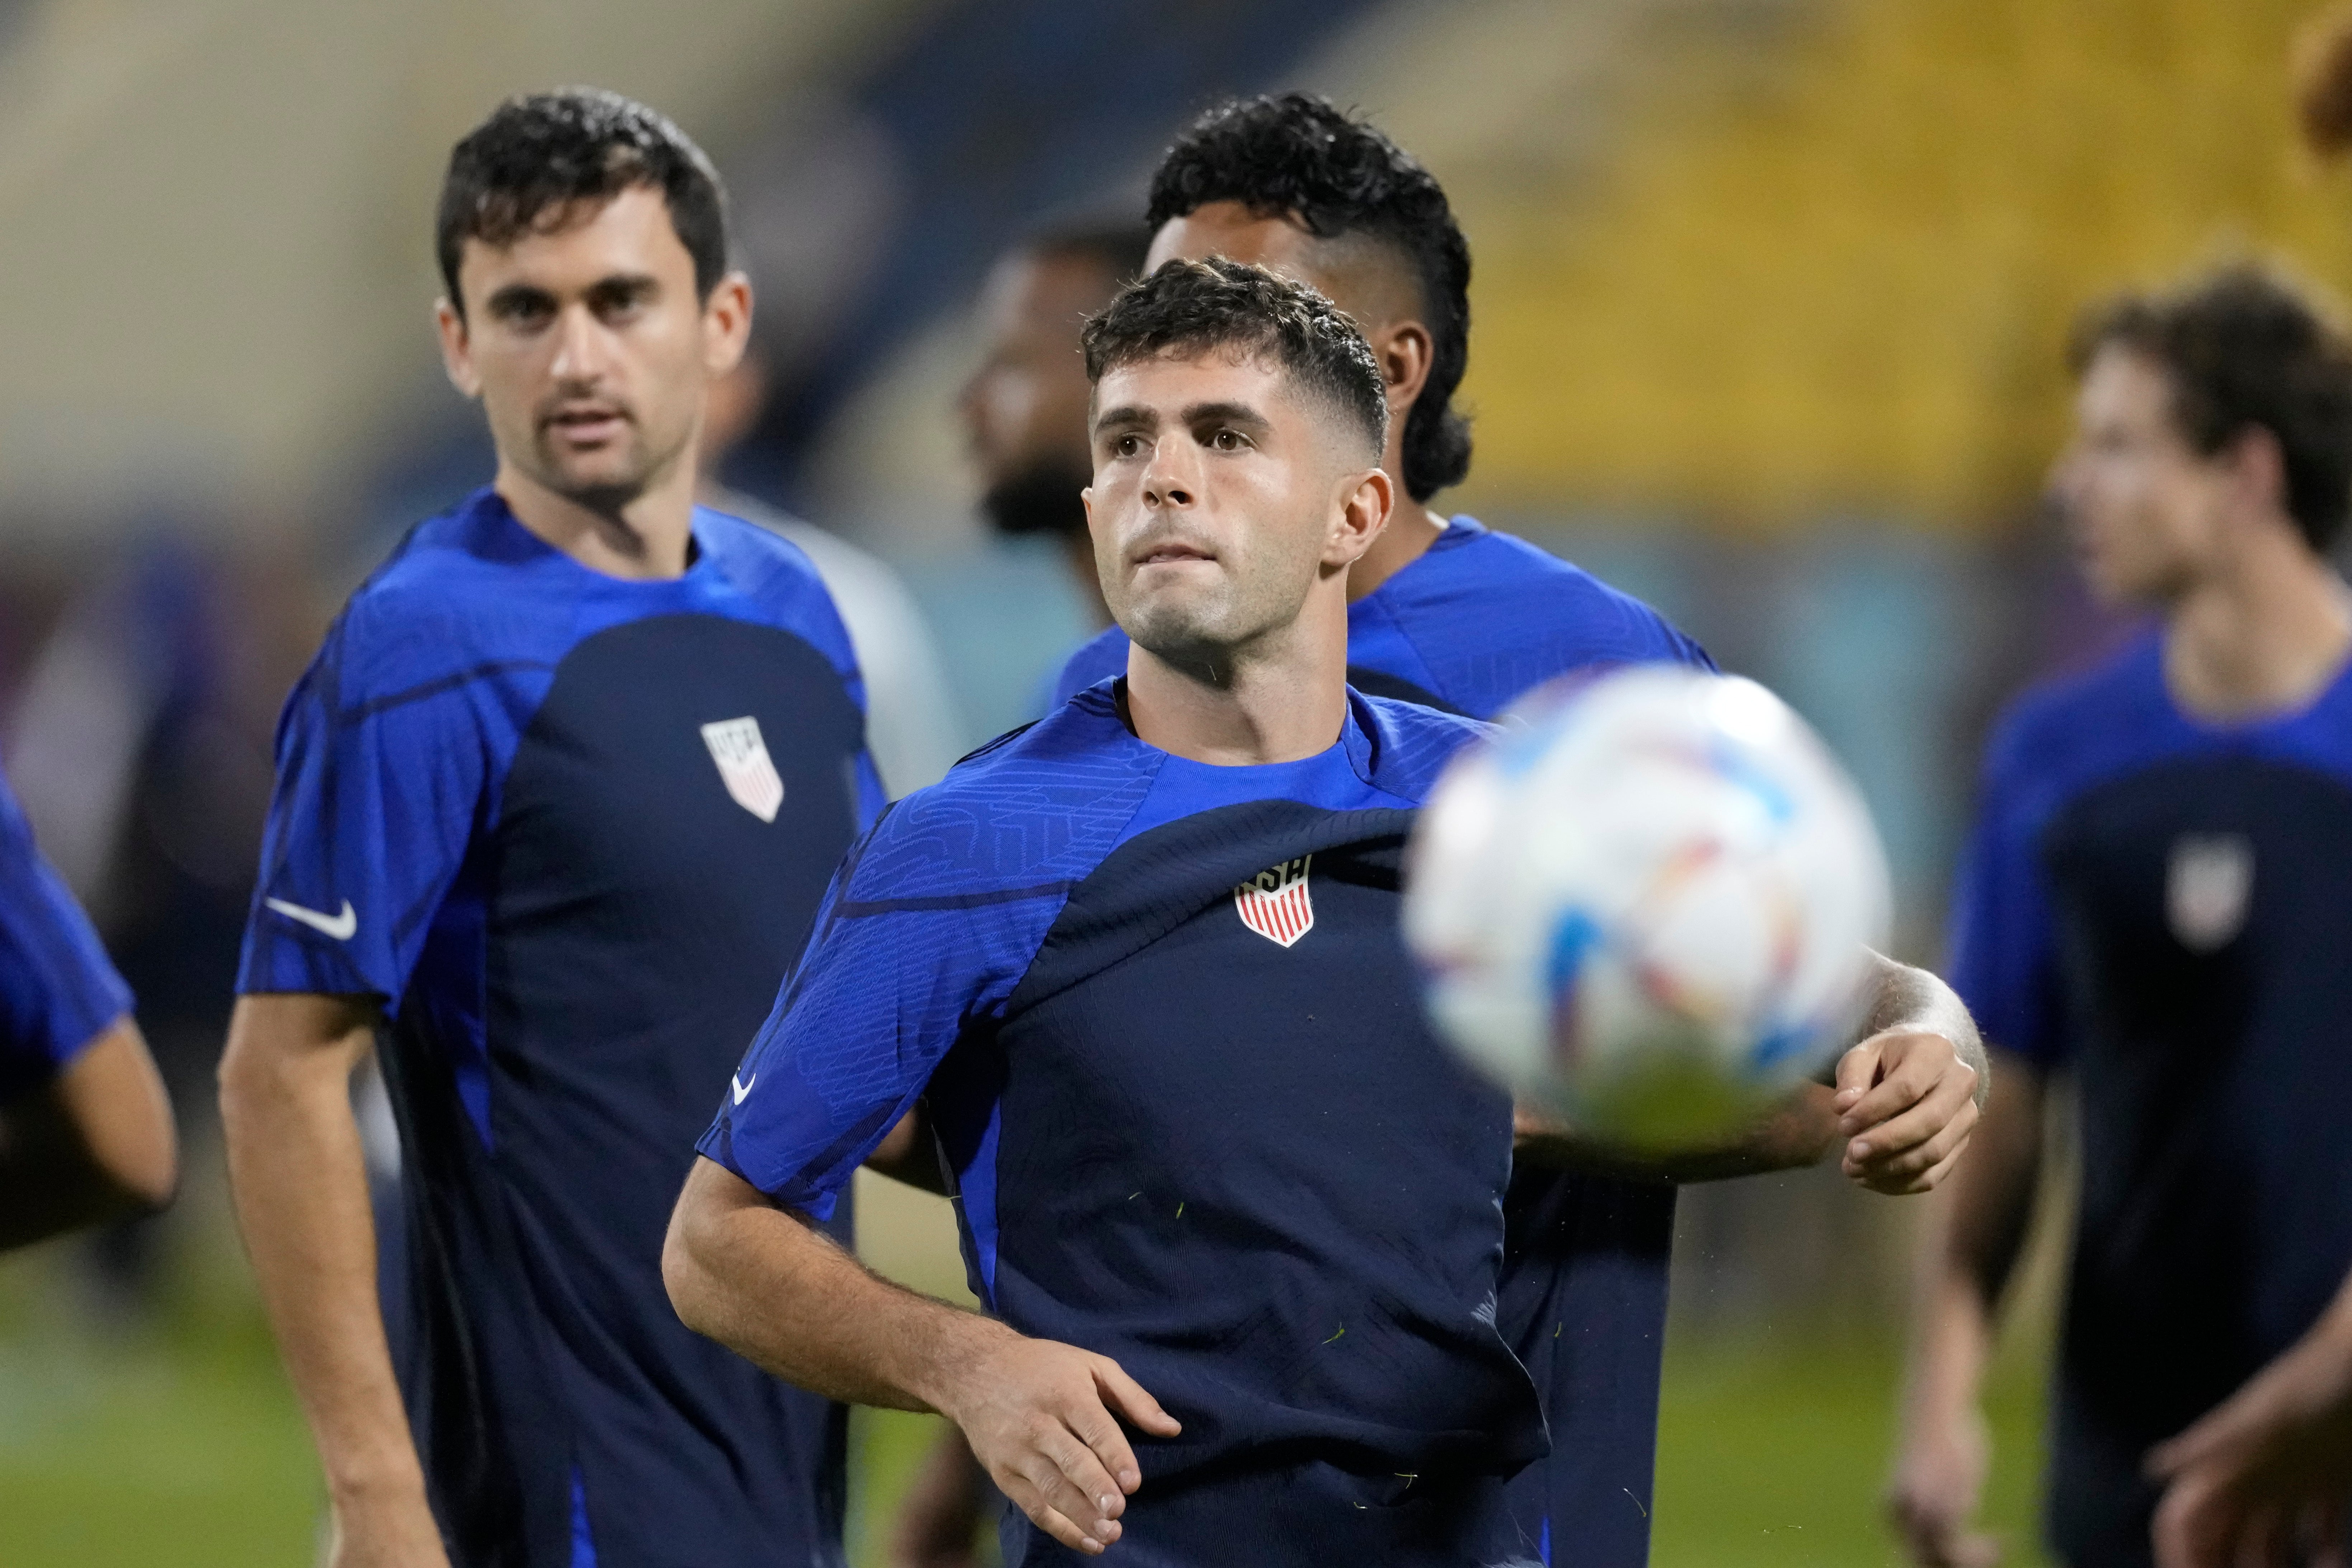 Chelsea forward Christian Pulisic starts for USA against Wales